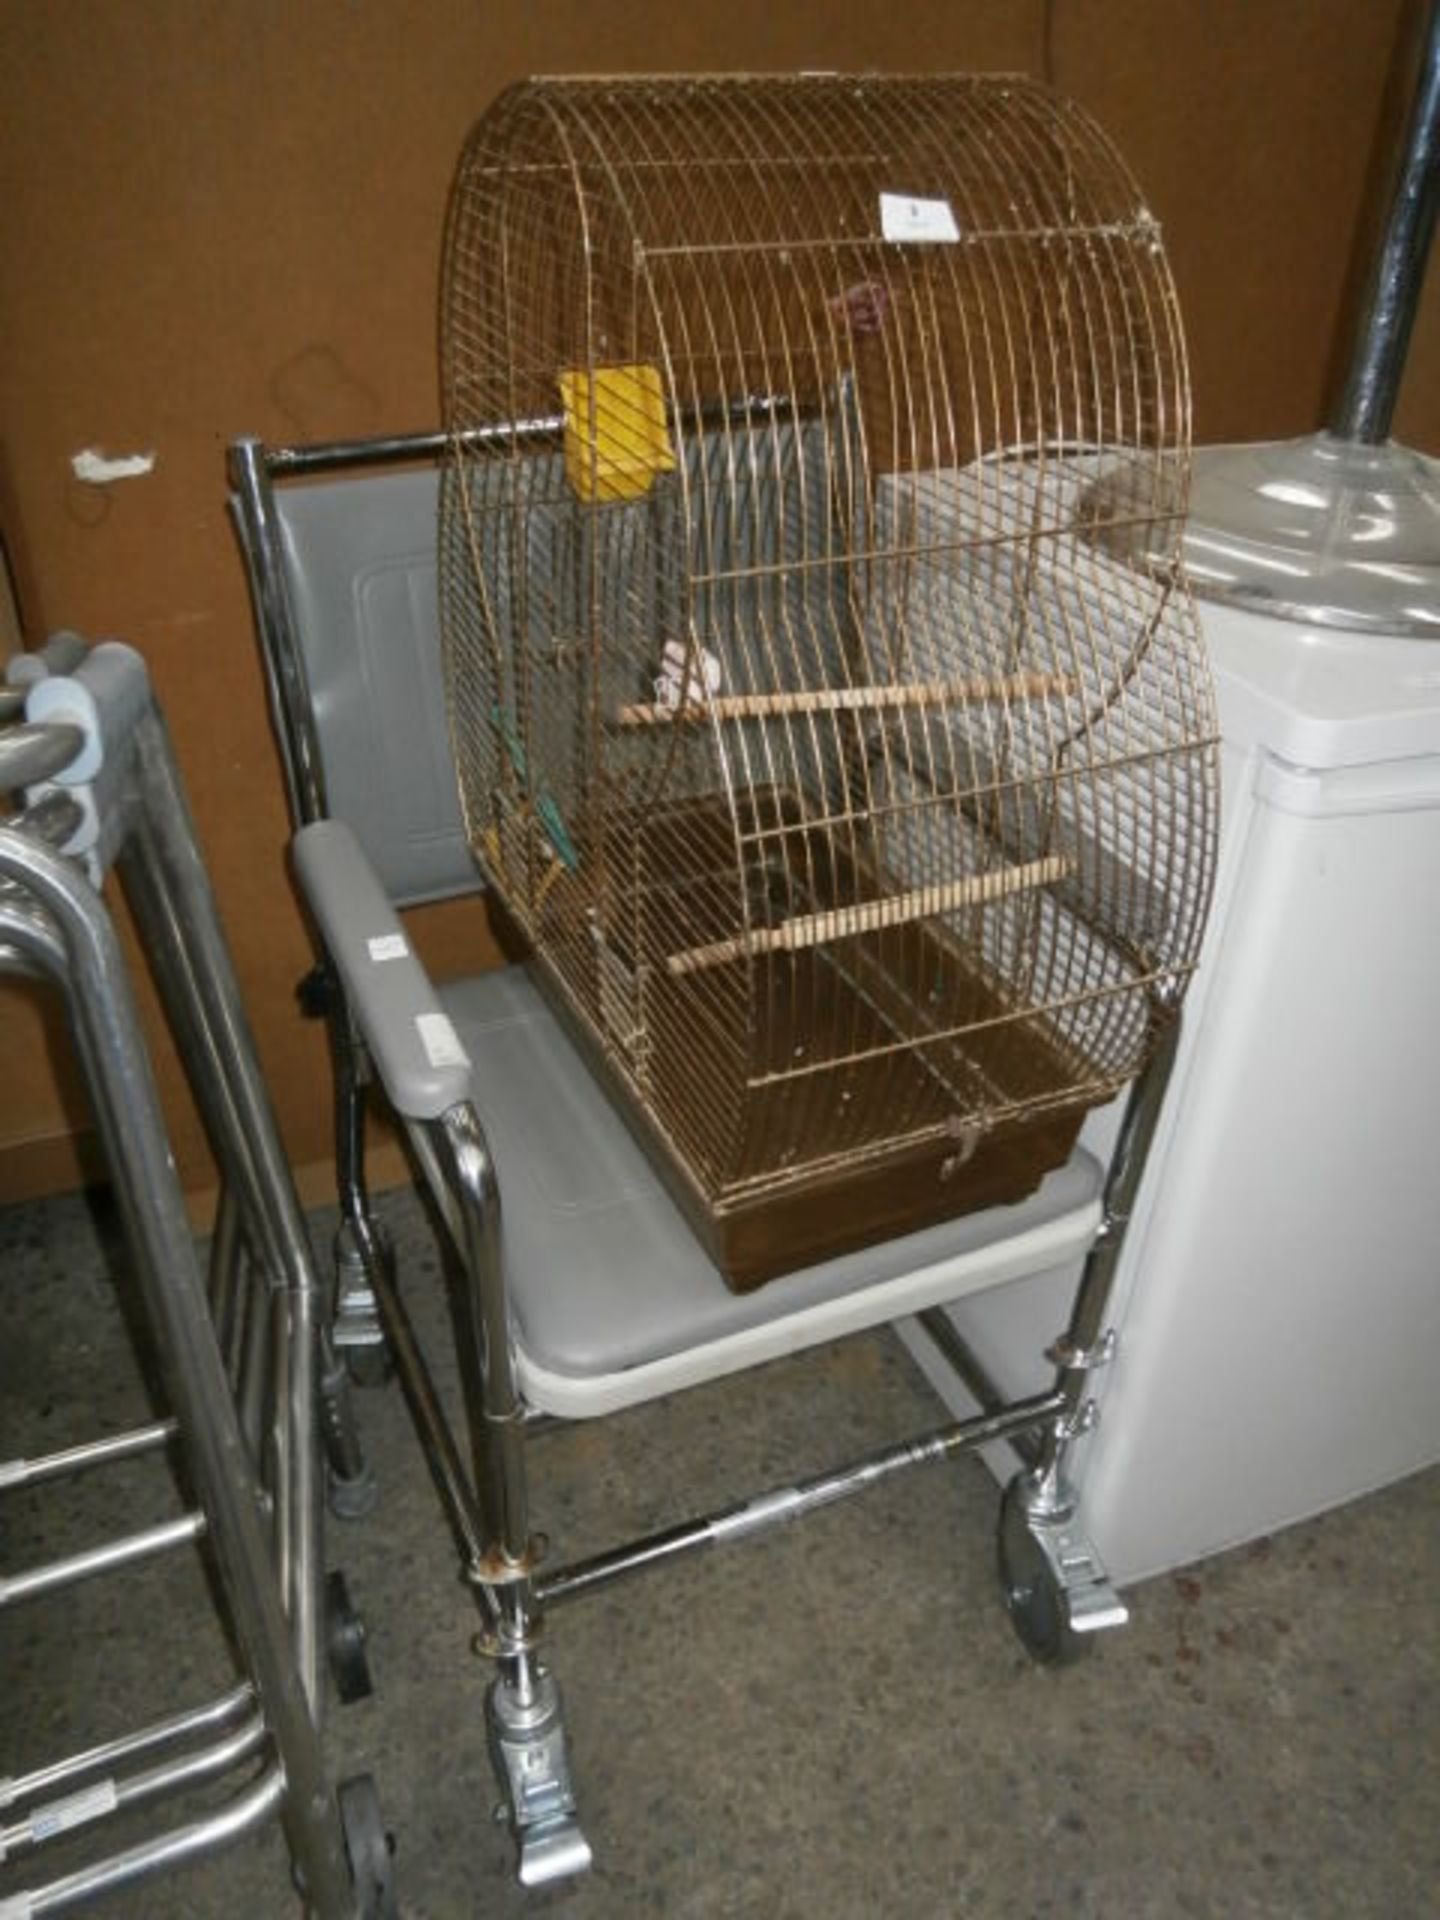 Wheel chair and a bird cage